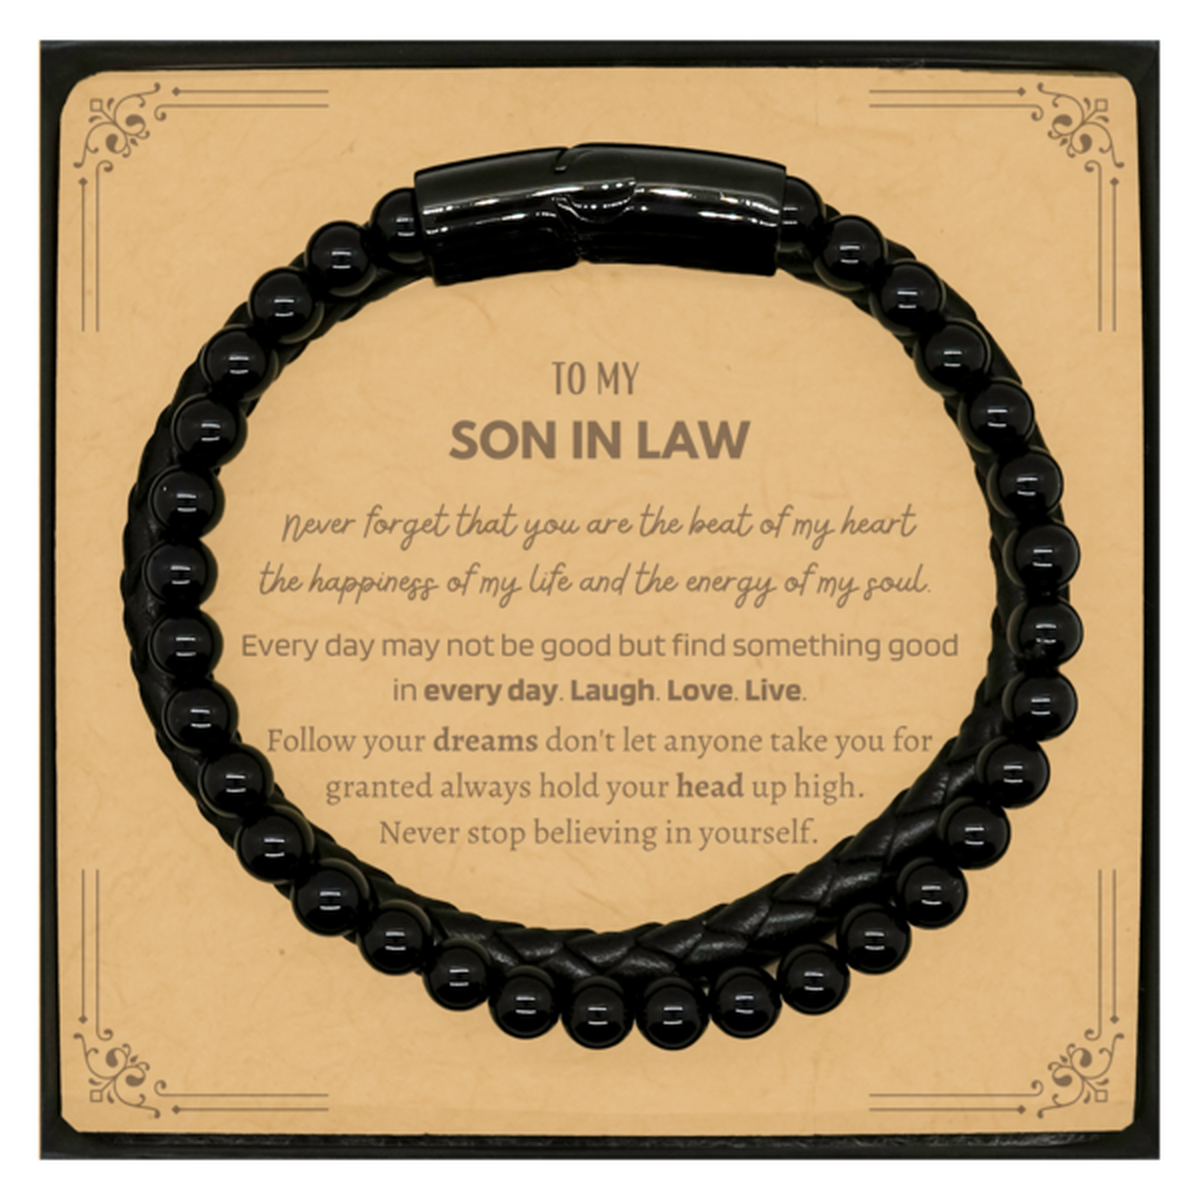 To My Son In Law Message Card Gifts, Christmas Son In Law Stone Leather Bracelets Present, Birthday Unique Motivational For Son In Law, To My Son In Law Never forget that you are the beat of my heart the happiness of my life and the energy of my soul